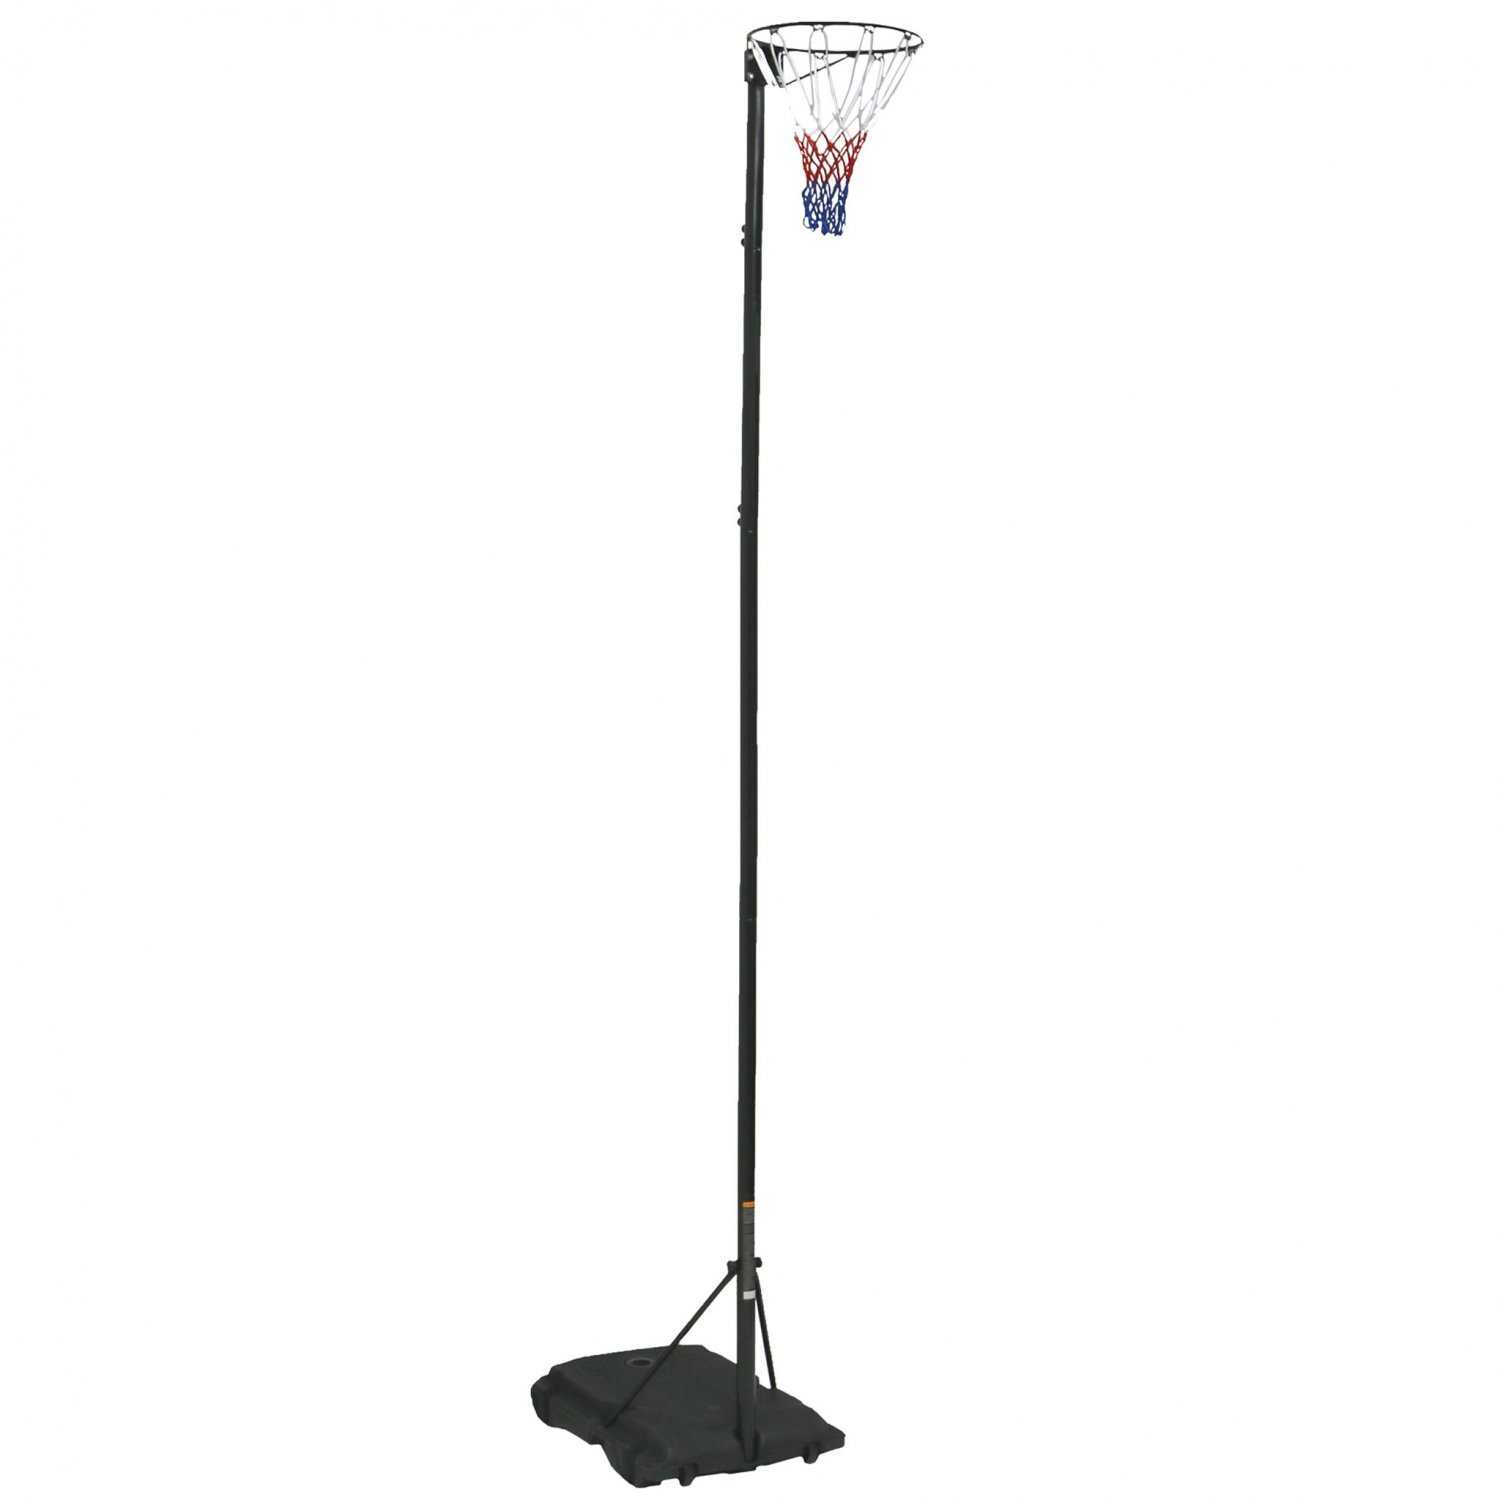 Oypla | 3.05m Netball Post | Shop Online Today